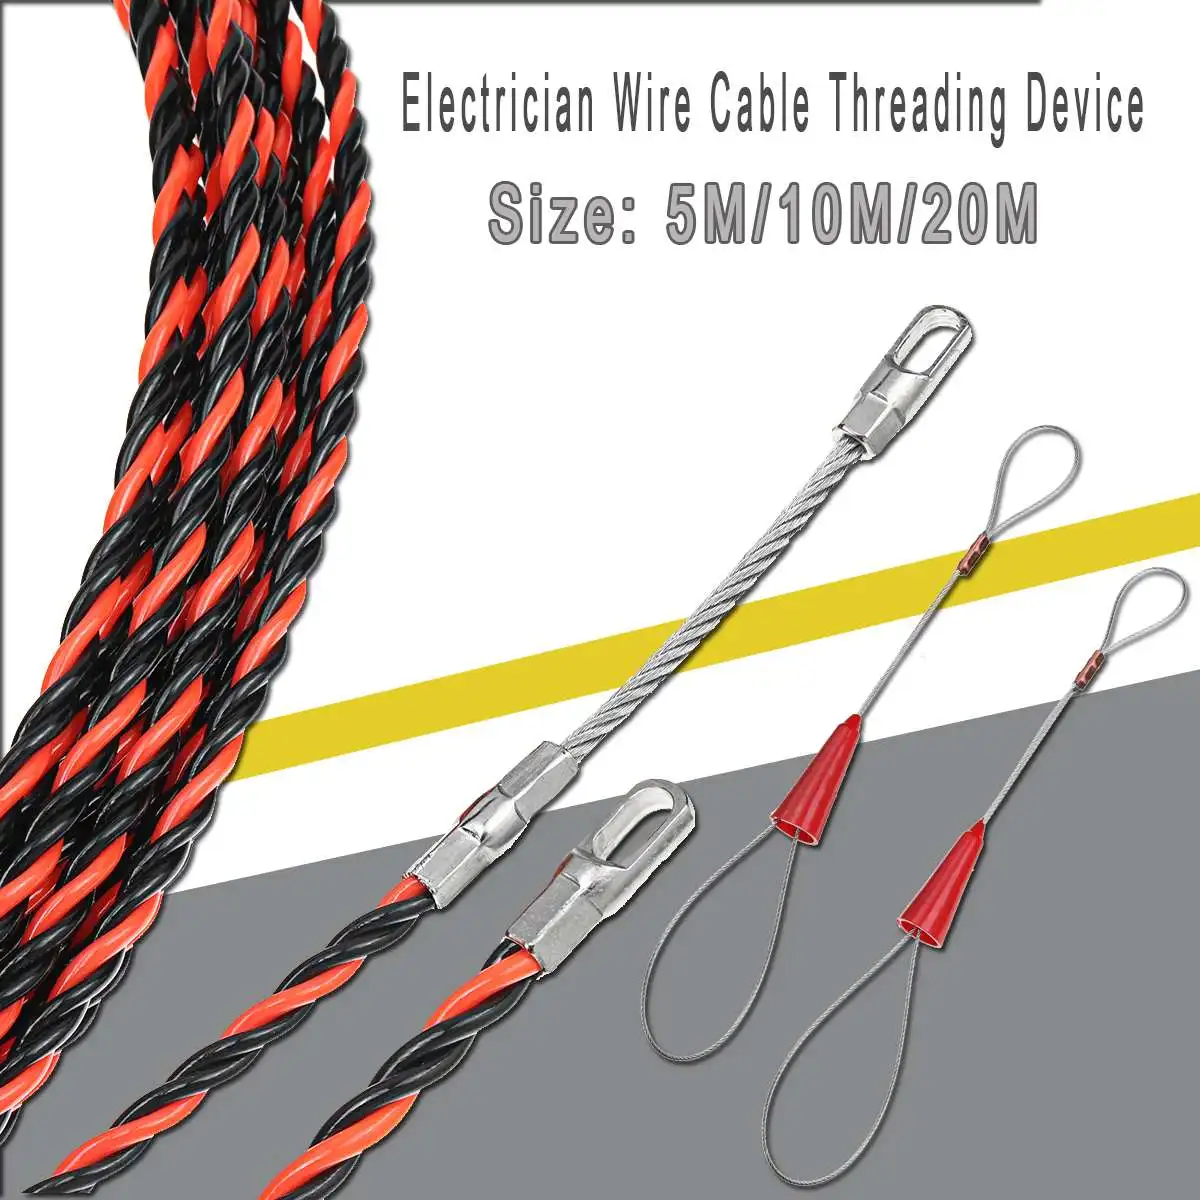 Electrician Wire Cable Threading Device 